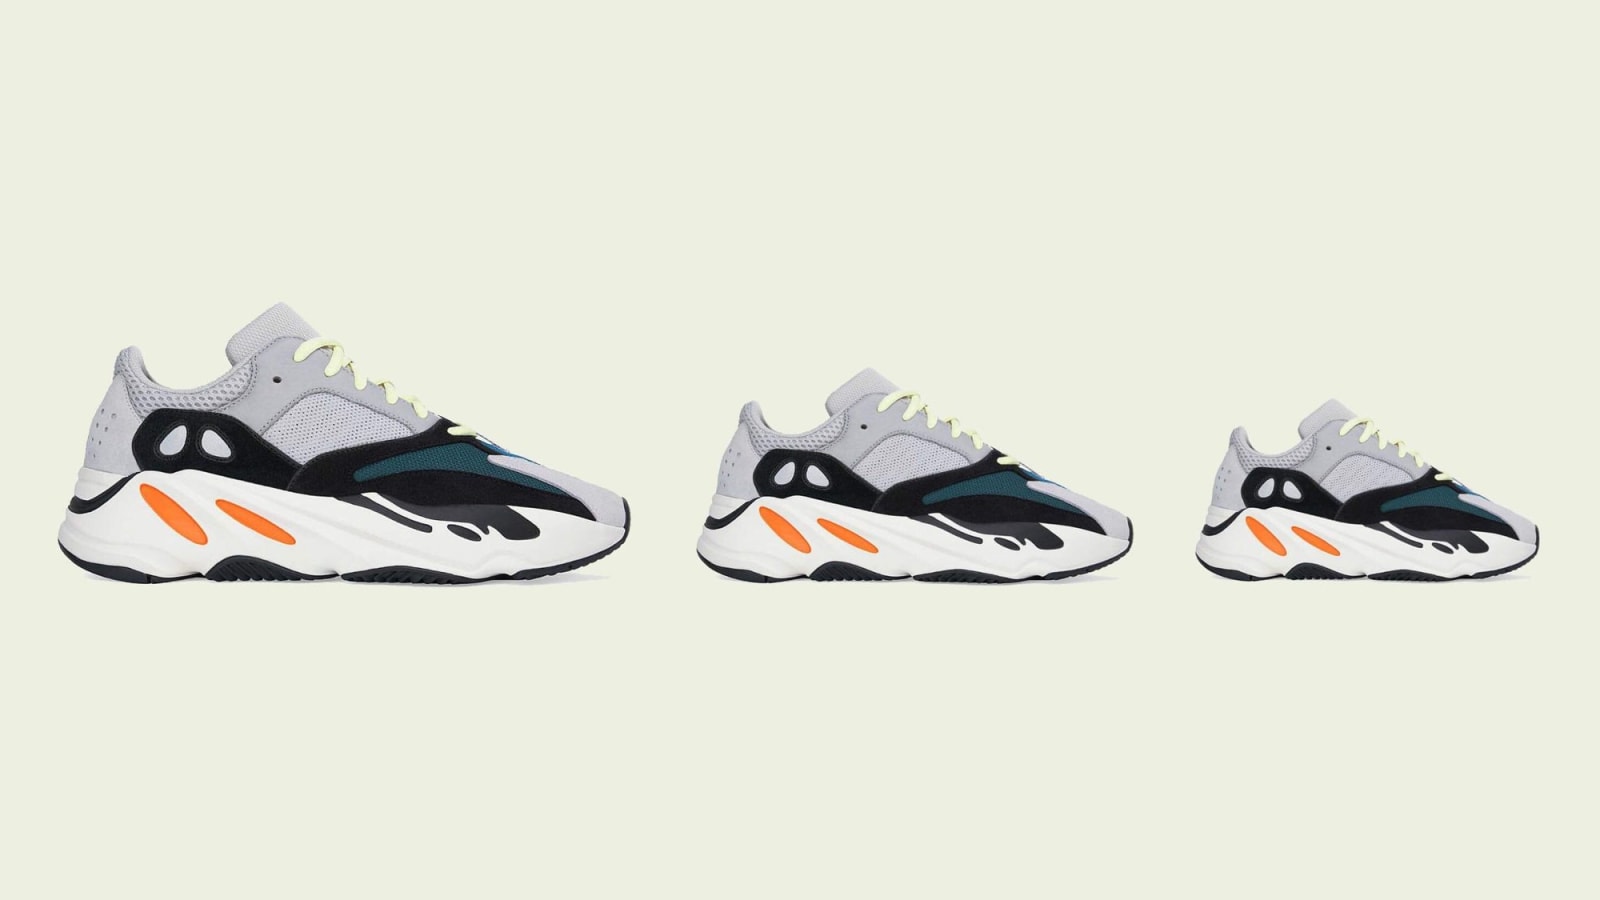 Adidas Yeezy Boost 700 &quot;Wave Runner&quot; To Restock Again: Release Details